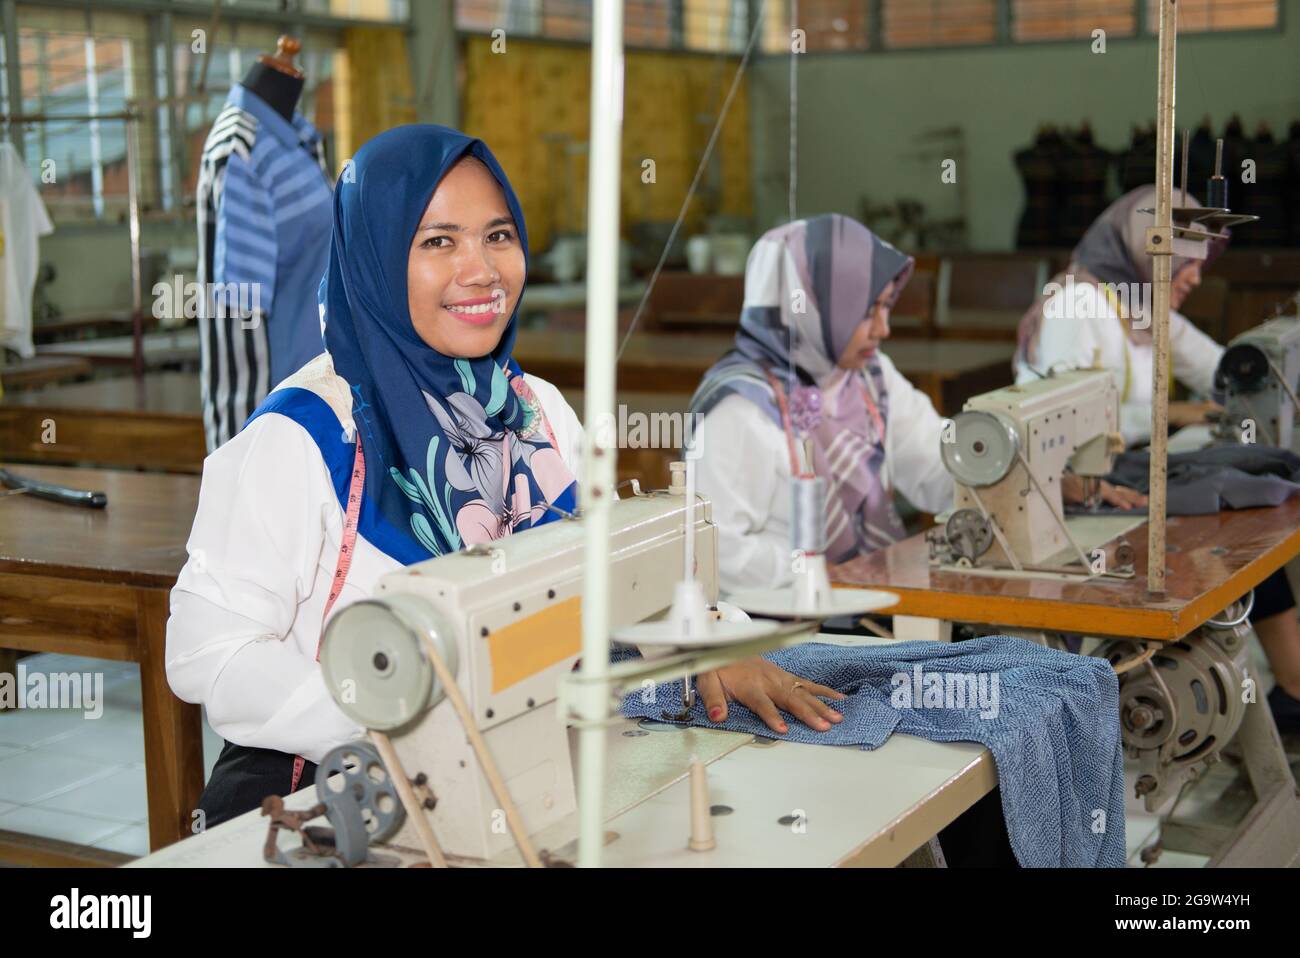 female employees in headscarves smile looking at cameras while working on sewing machines Stock Photo